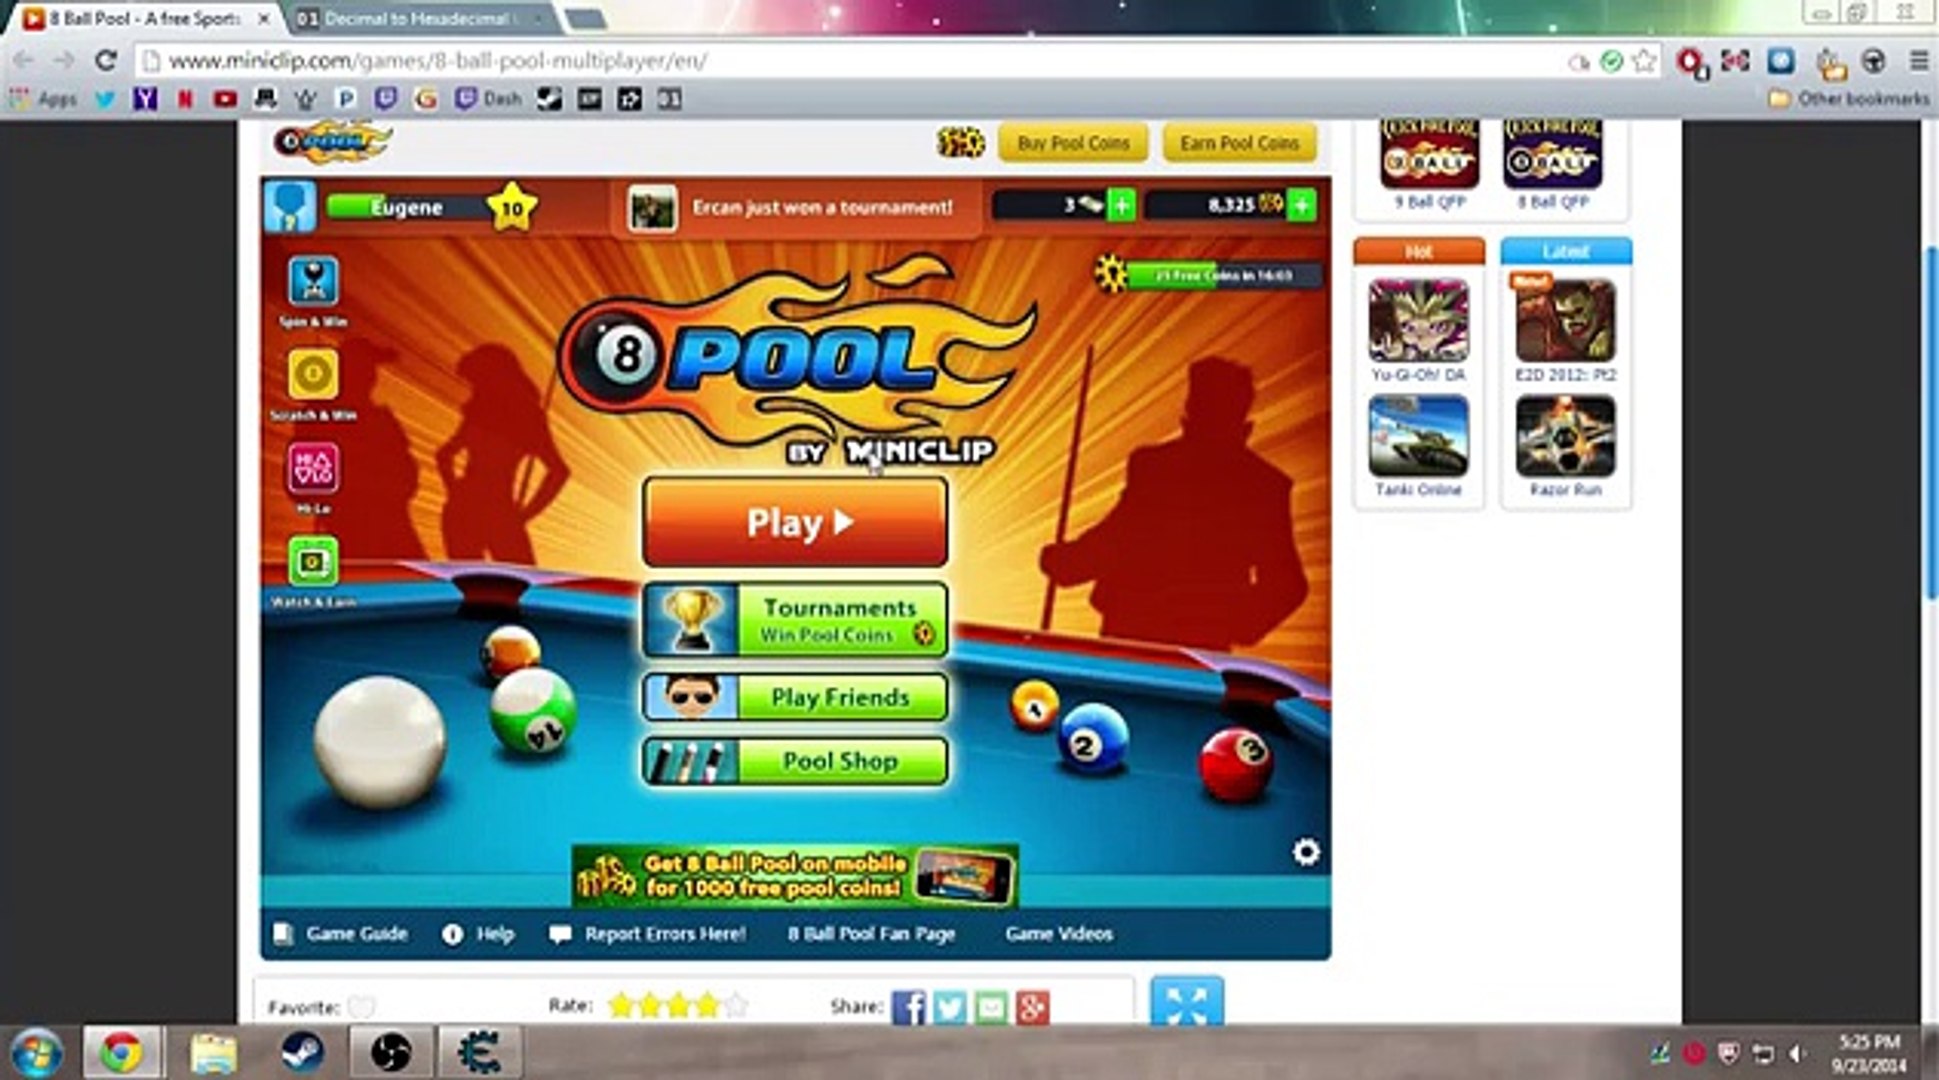 8 ball pool hack android (MODDED) - 